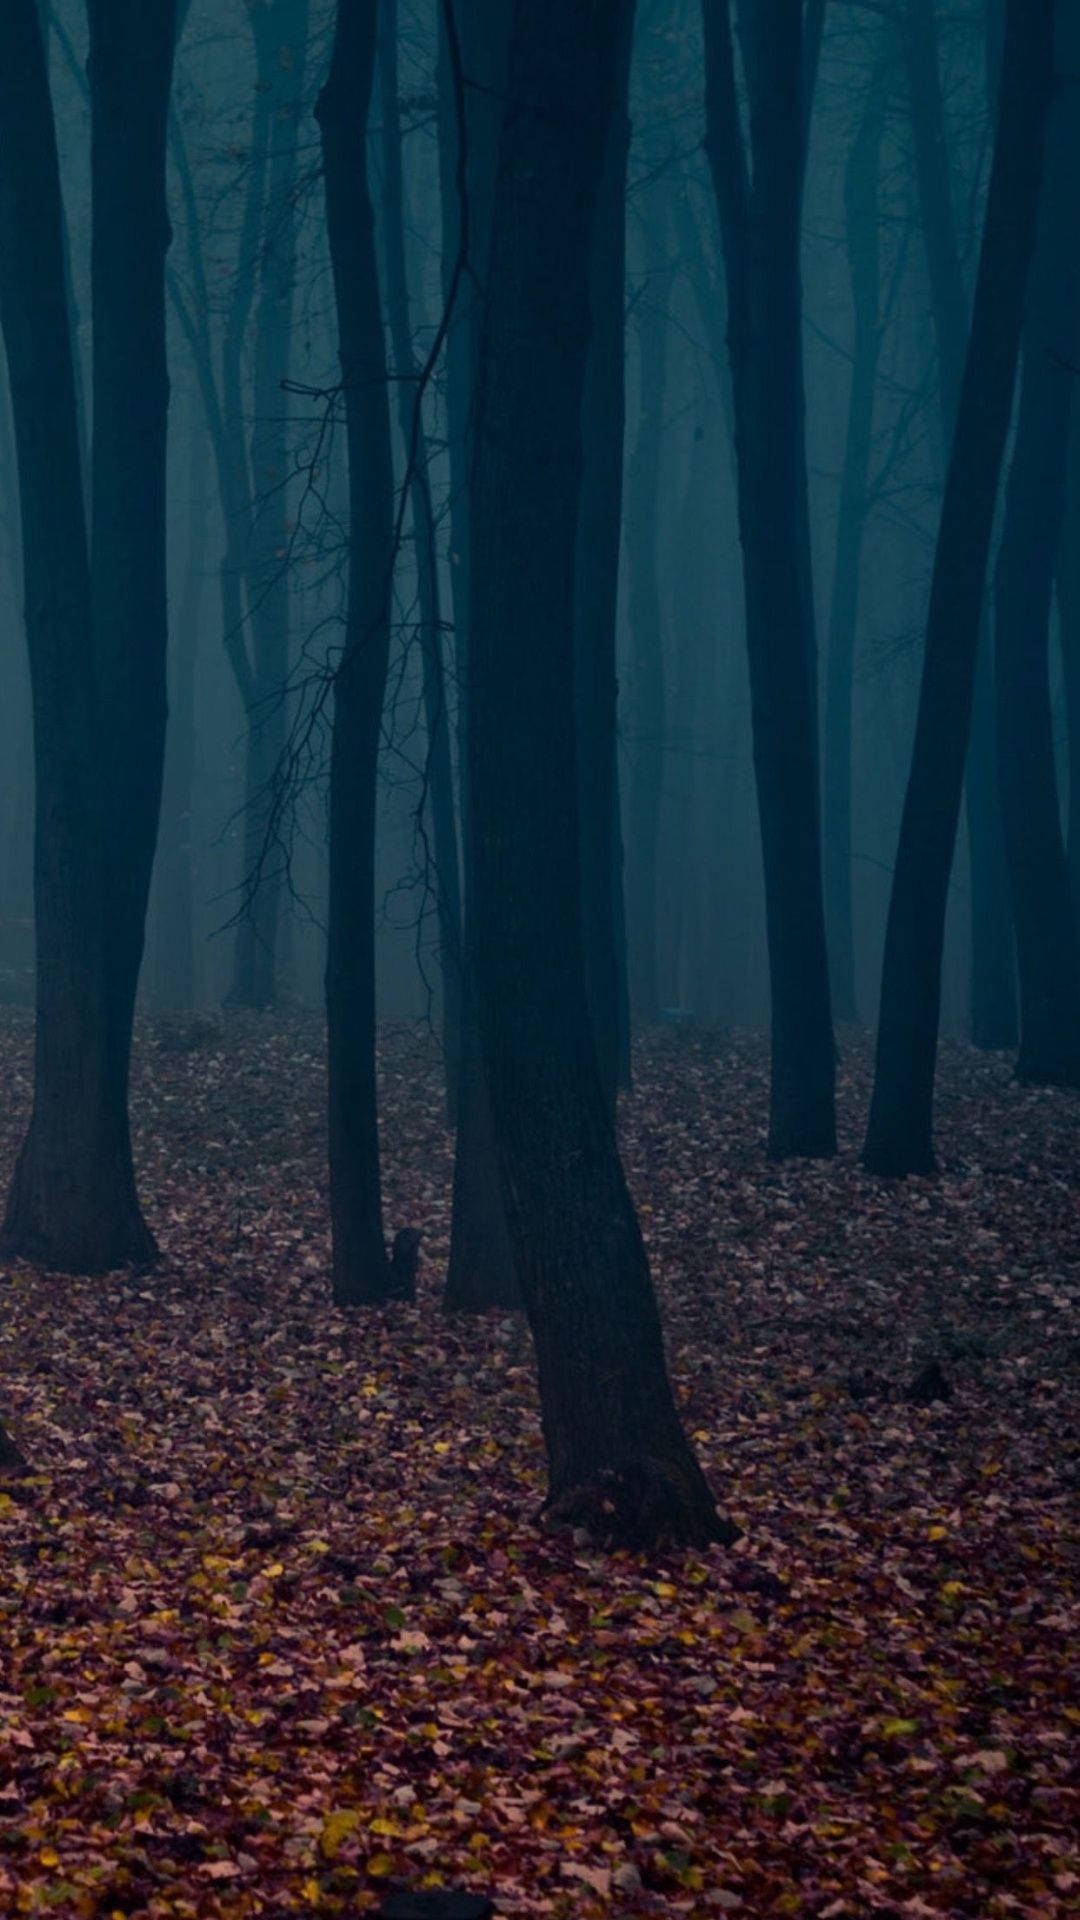 A Dark Forest With Leaves On The Ground Wallpaper